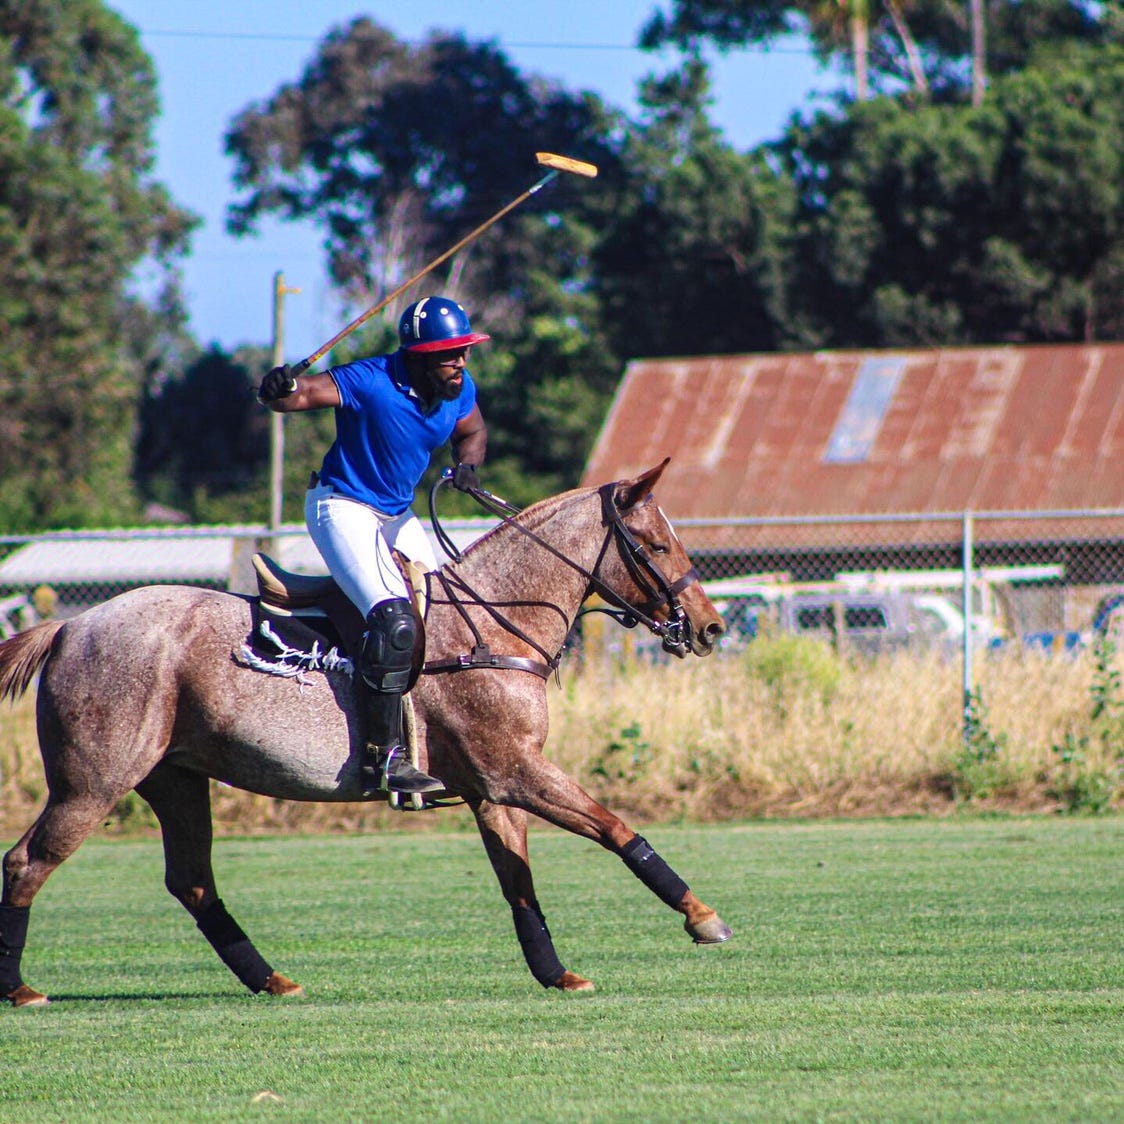 After Dedicating One Year and over 100 Hours to Playing Polo Here's What I  Learned and Would Like to Share | by Dale B. Johnson | Medium